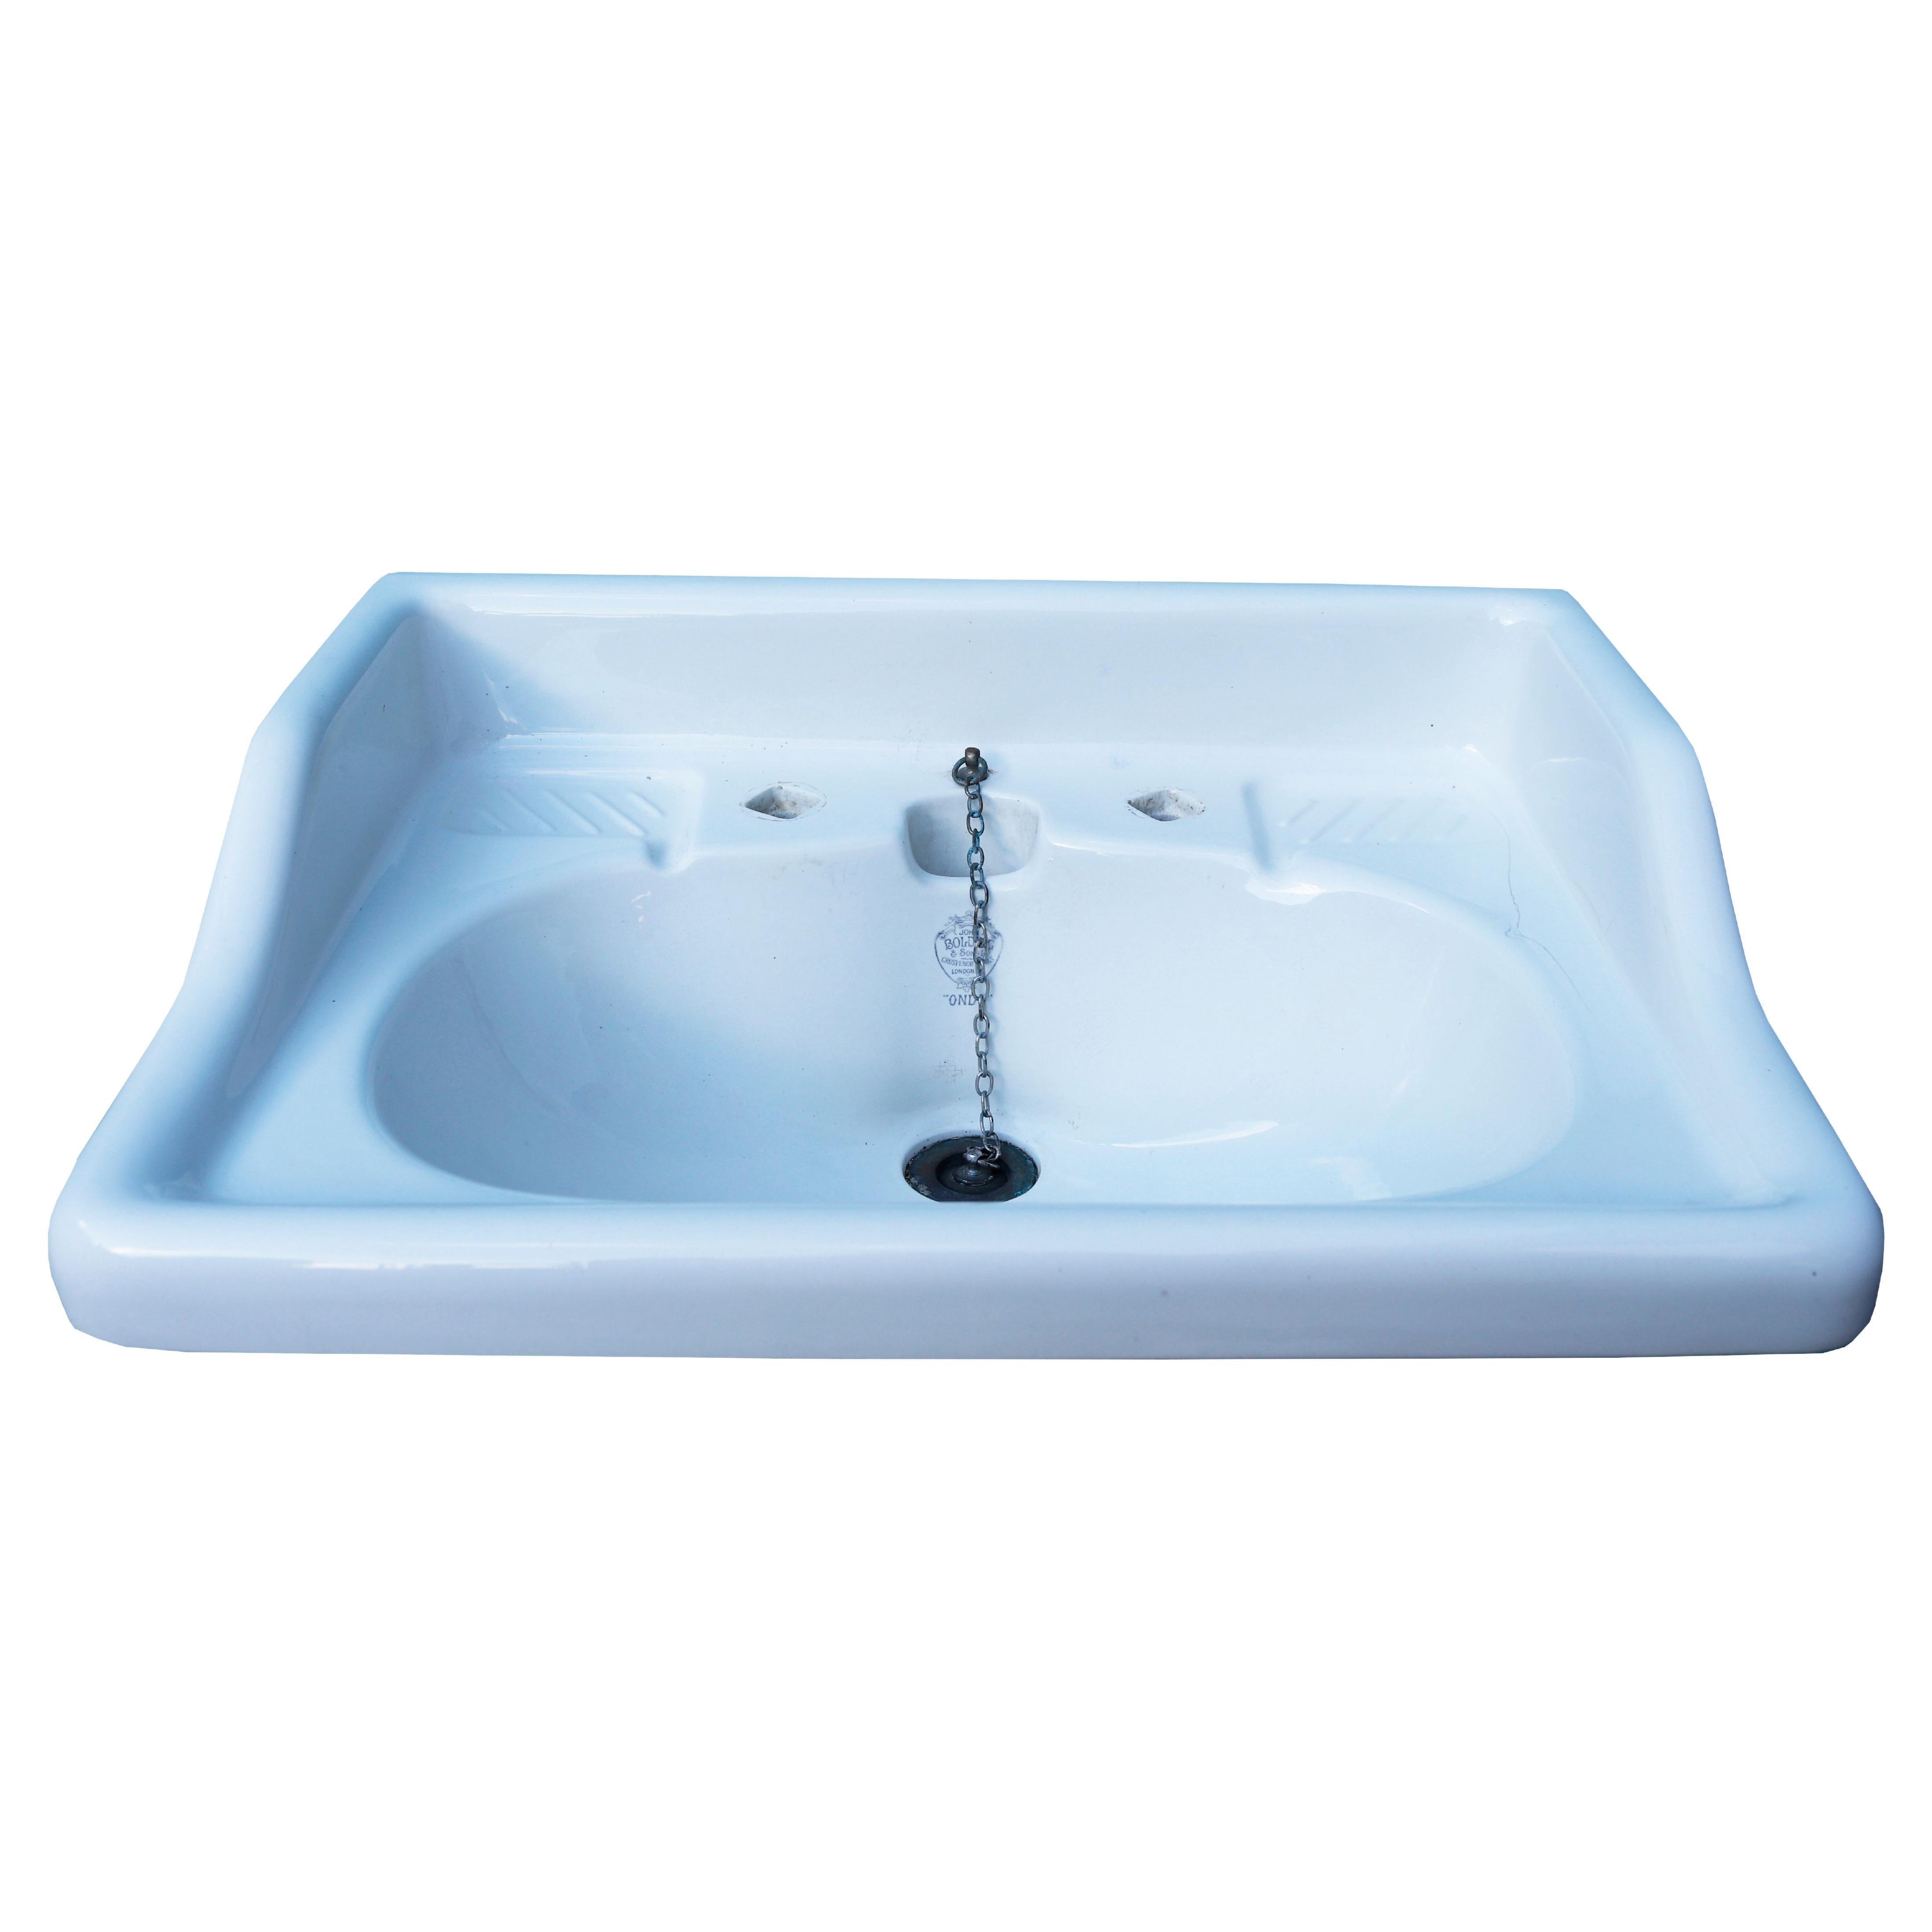 What is a ceramic basin?